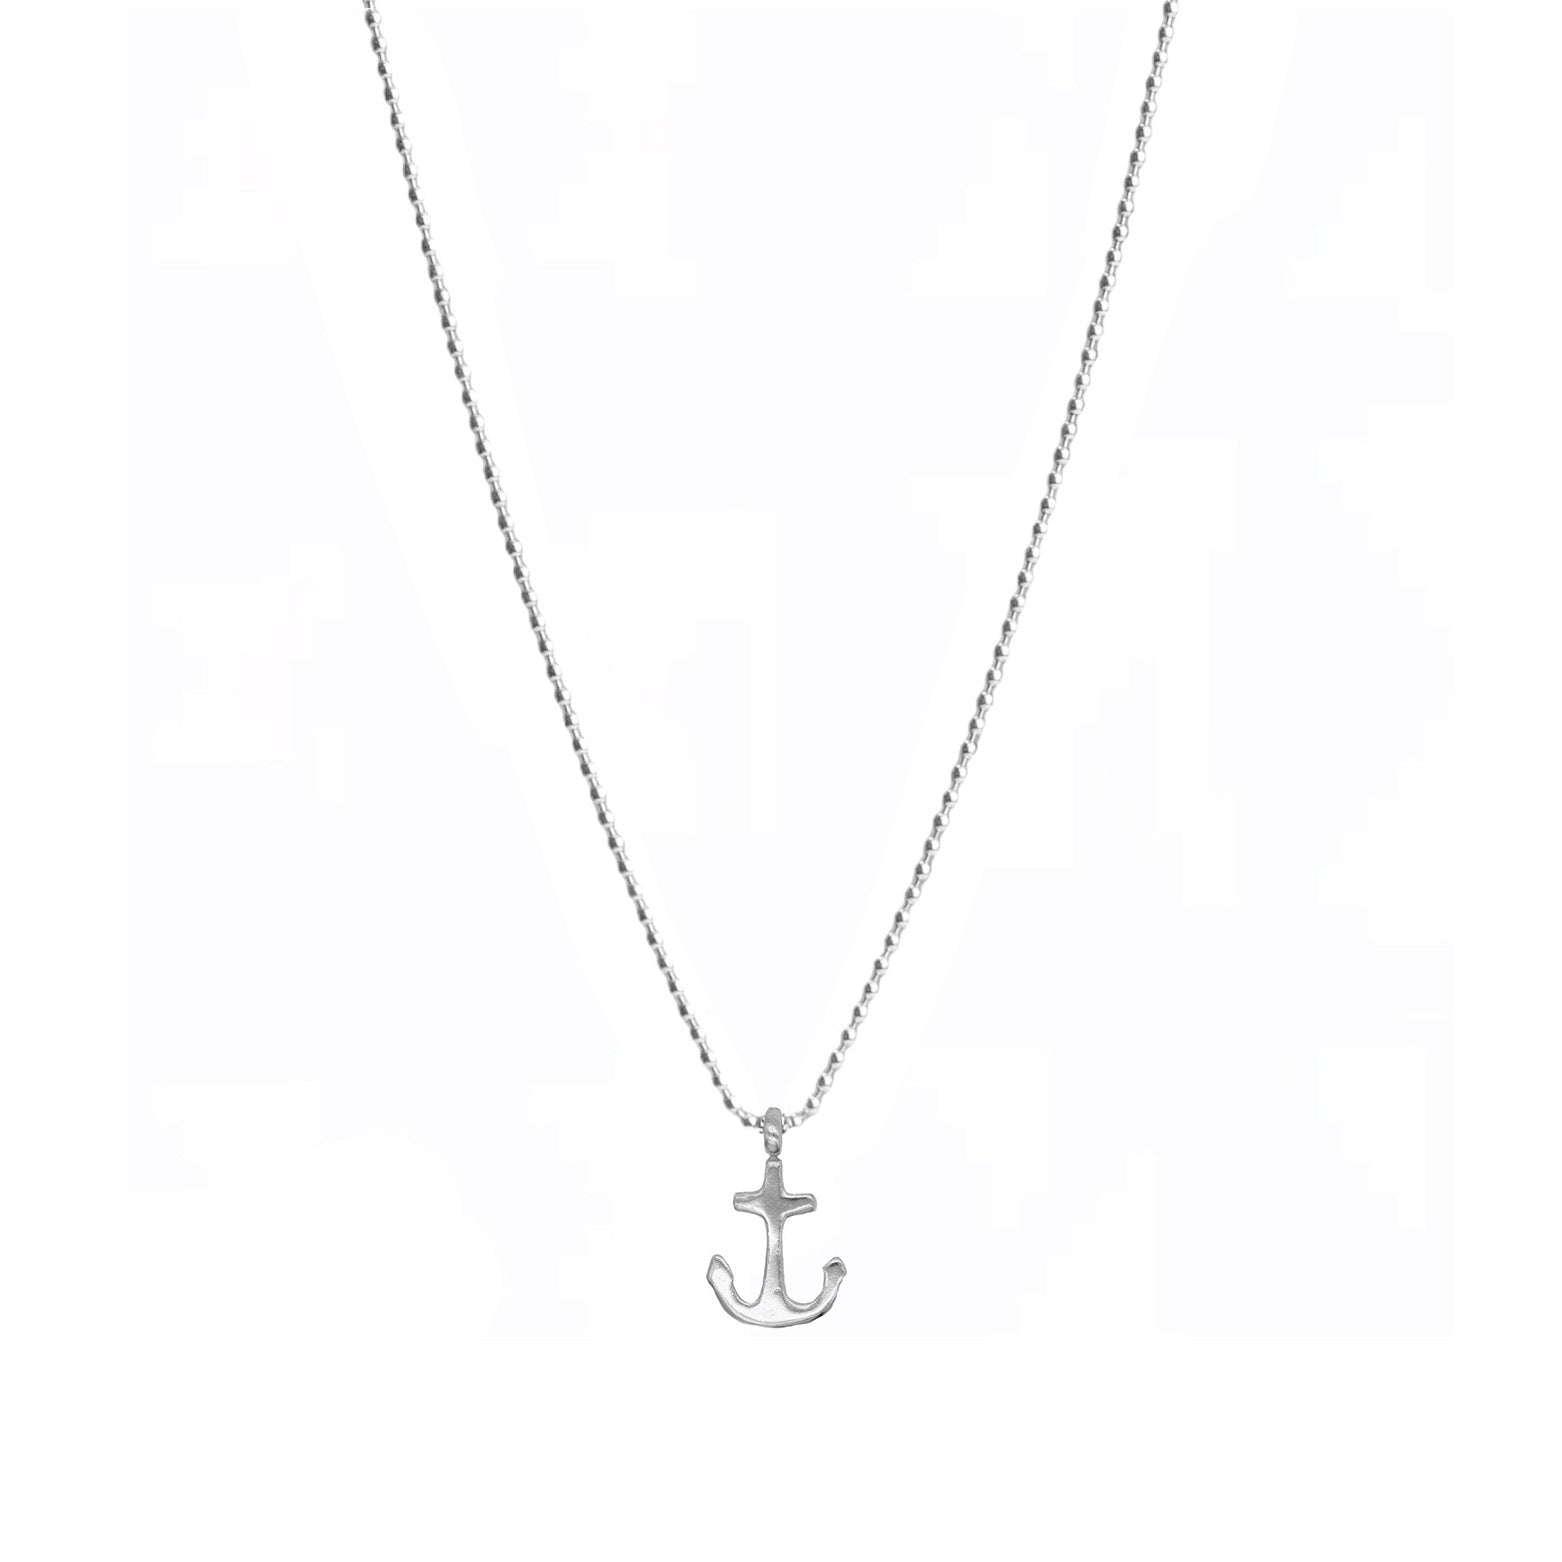 Belle & Bee Sterling Silver ball chain necklace with anchor charm